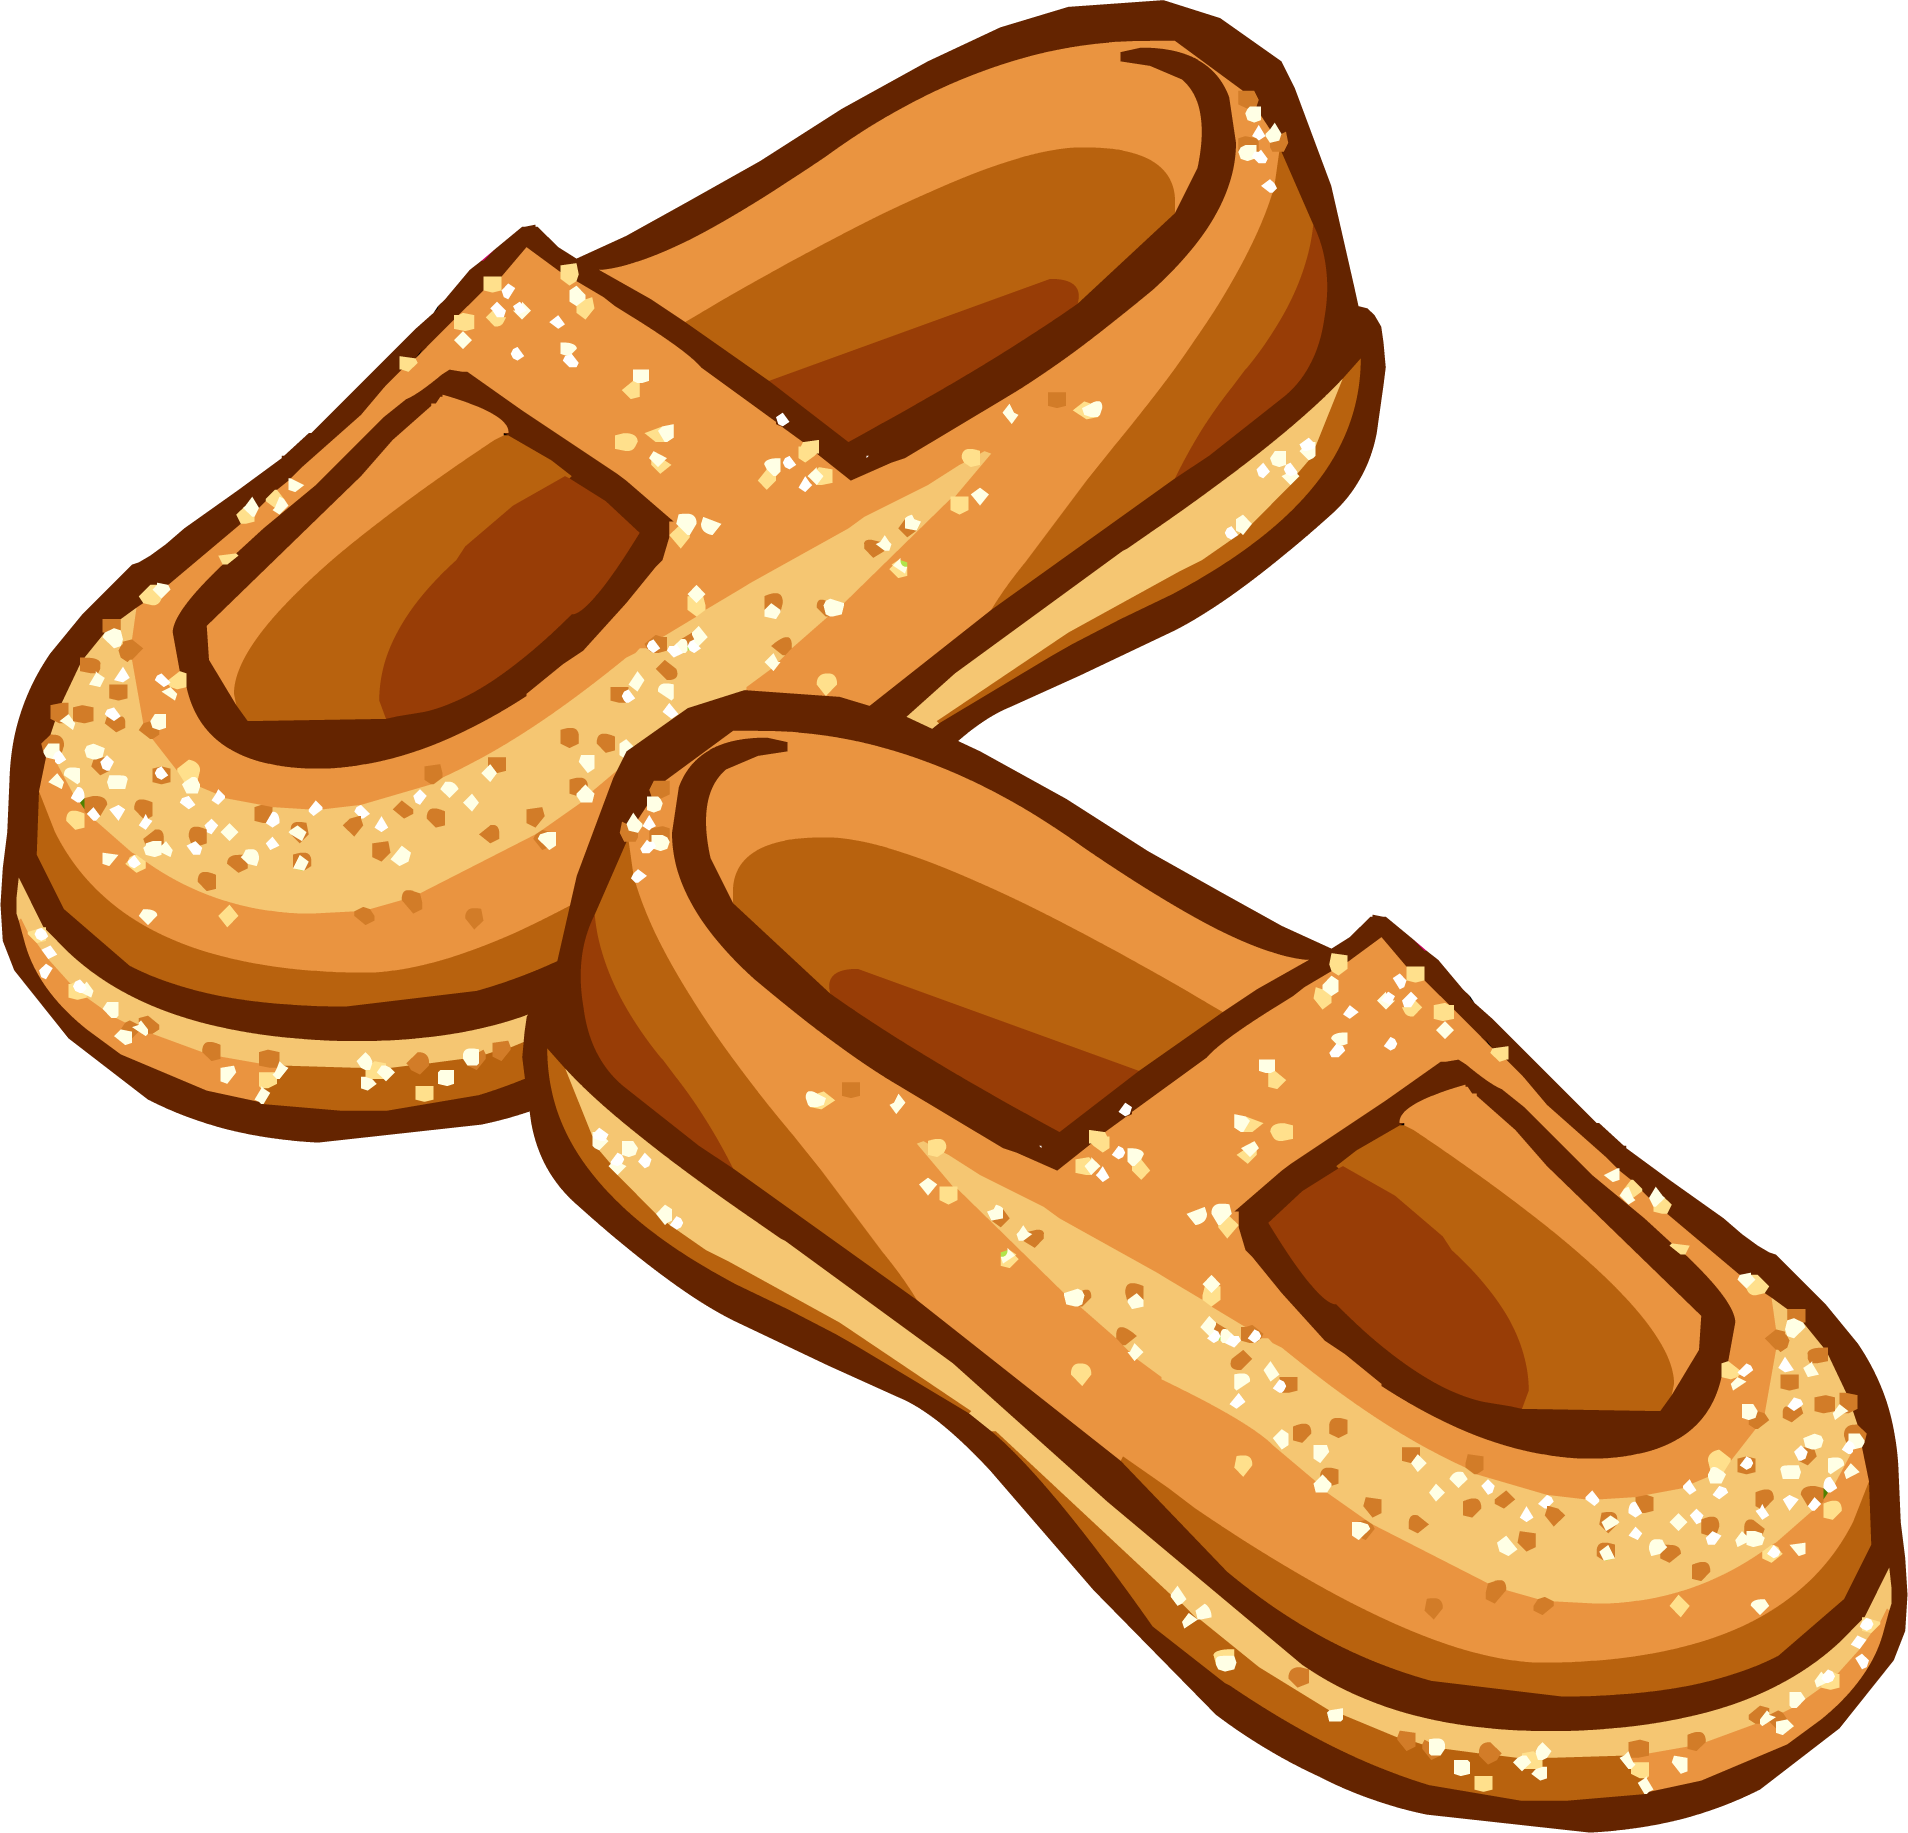 Sparkly Amber Shoes Icon - Club Penguin Orange Shoes (1908x1833)